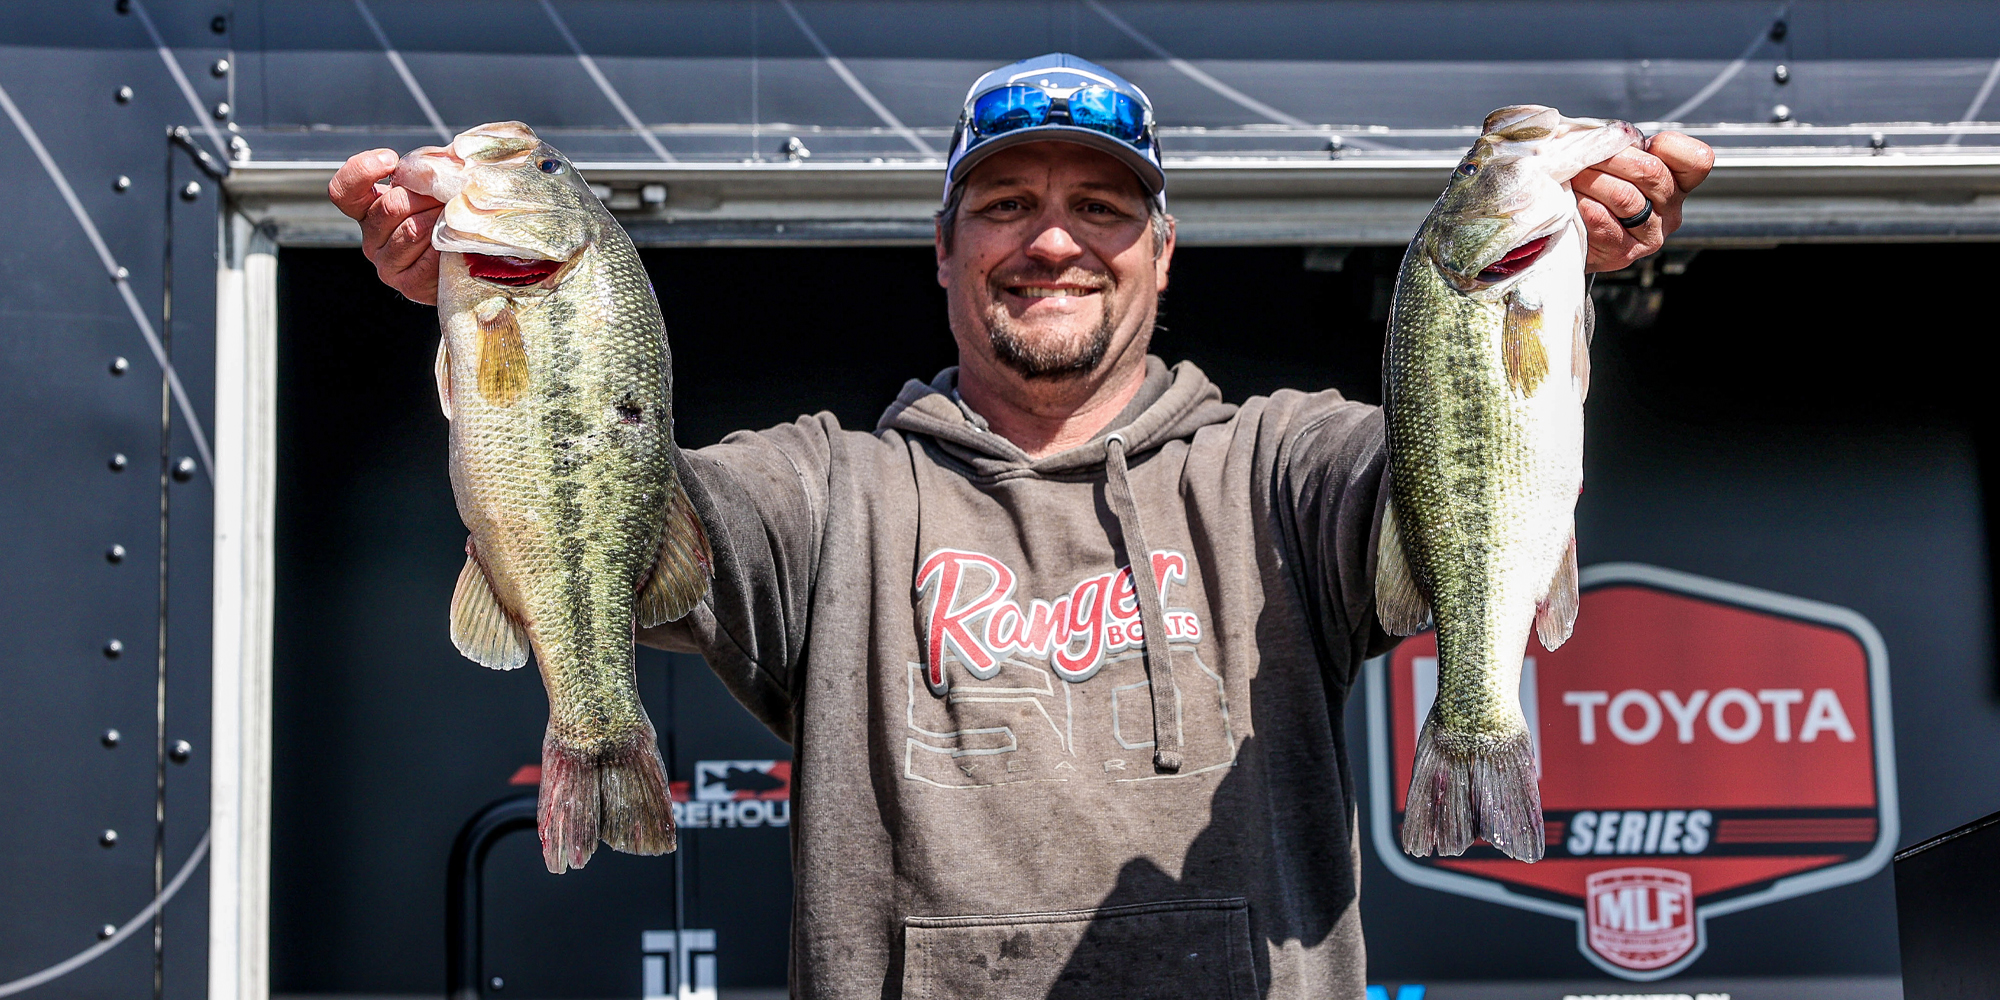 King climbs into driver's seat at Dardanelle Toyota Series - Major League  Fishing